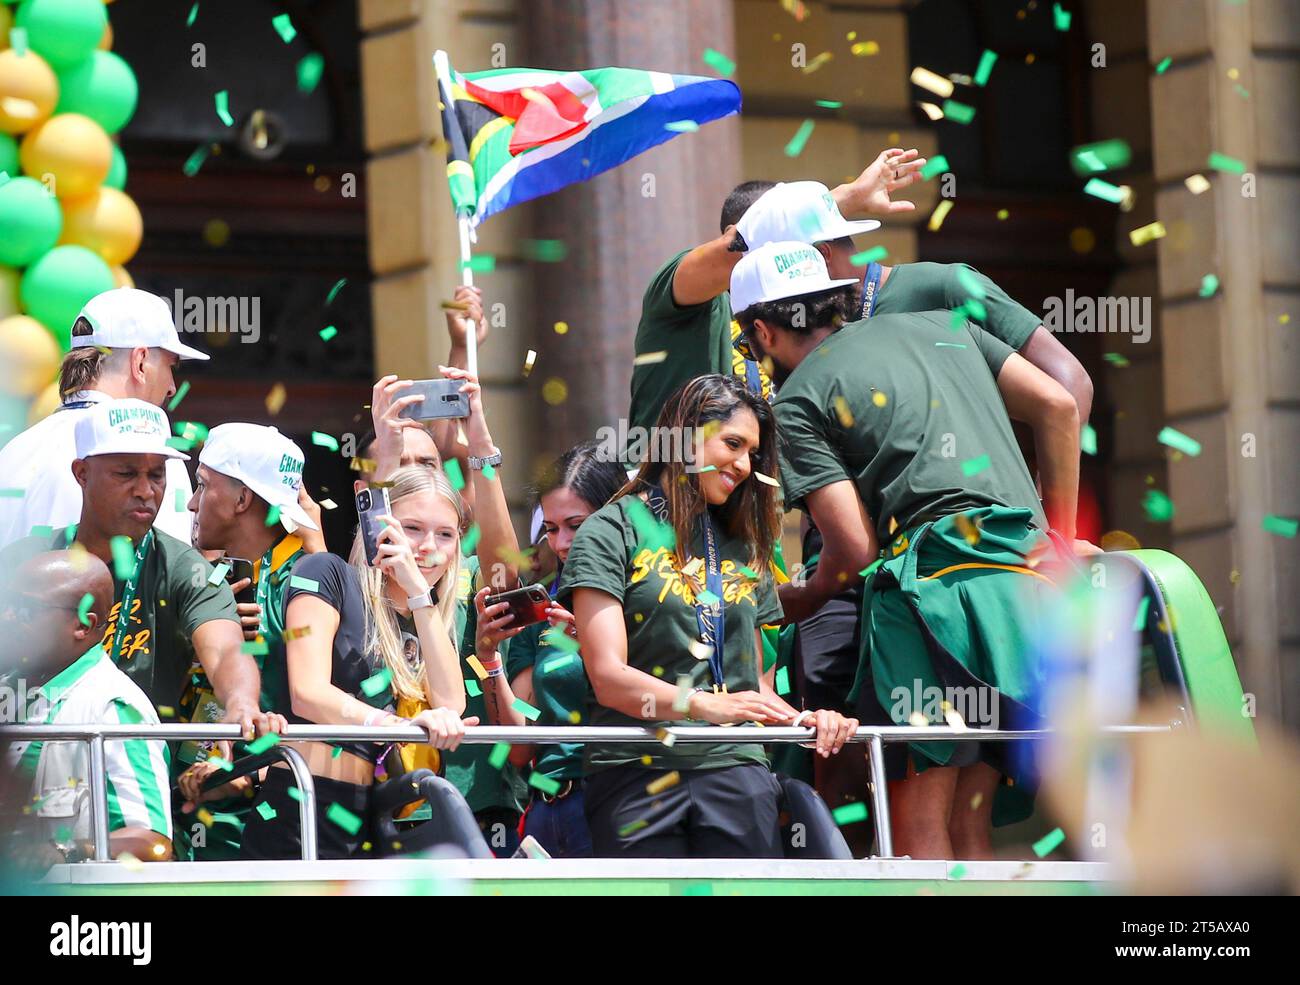 CAPE TOWN, SOUTH AFRICA - NOVEMBER 03: Springbok dietician, Zeenat Simjee, during the Springbok Trophy tour in Cape Town on November 03, 2023 in Cape Town, South Africa. The Springboks beat the New Zealand All Blacks 12-11 to win the Rugby World Cup in Paris, France on Saturday 28 October 2023. (Photo by Roger Sedres) Stock Photo